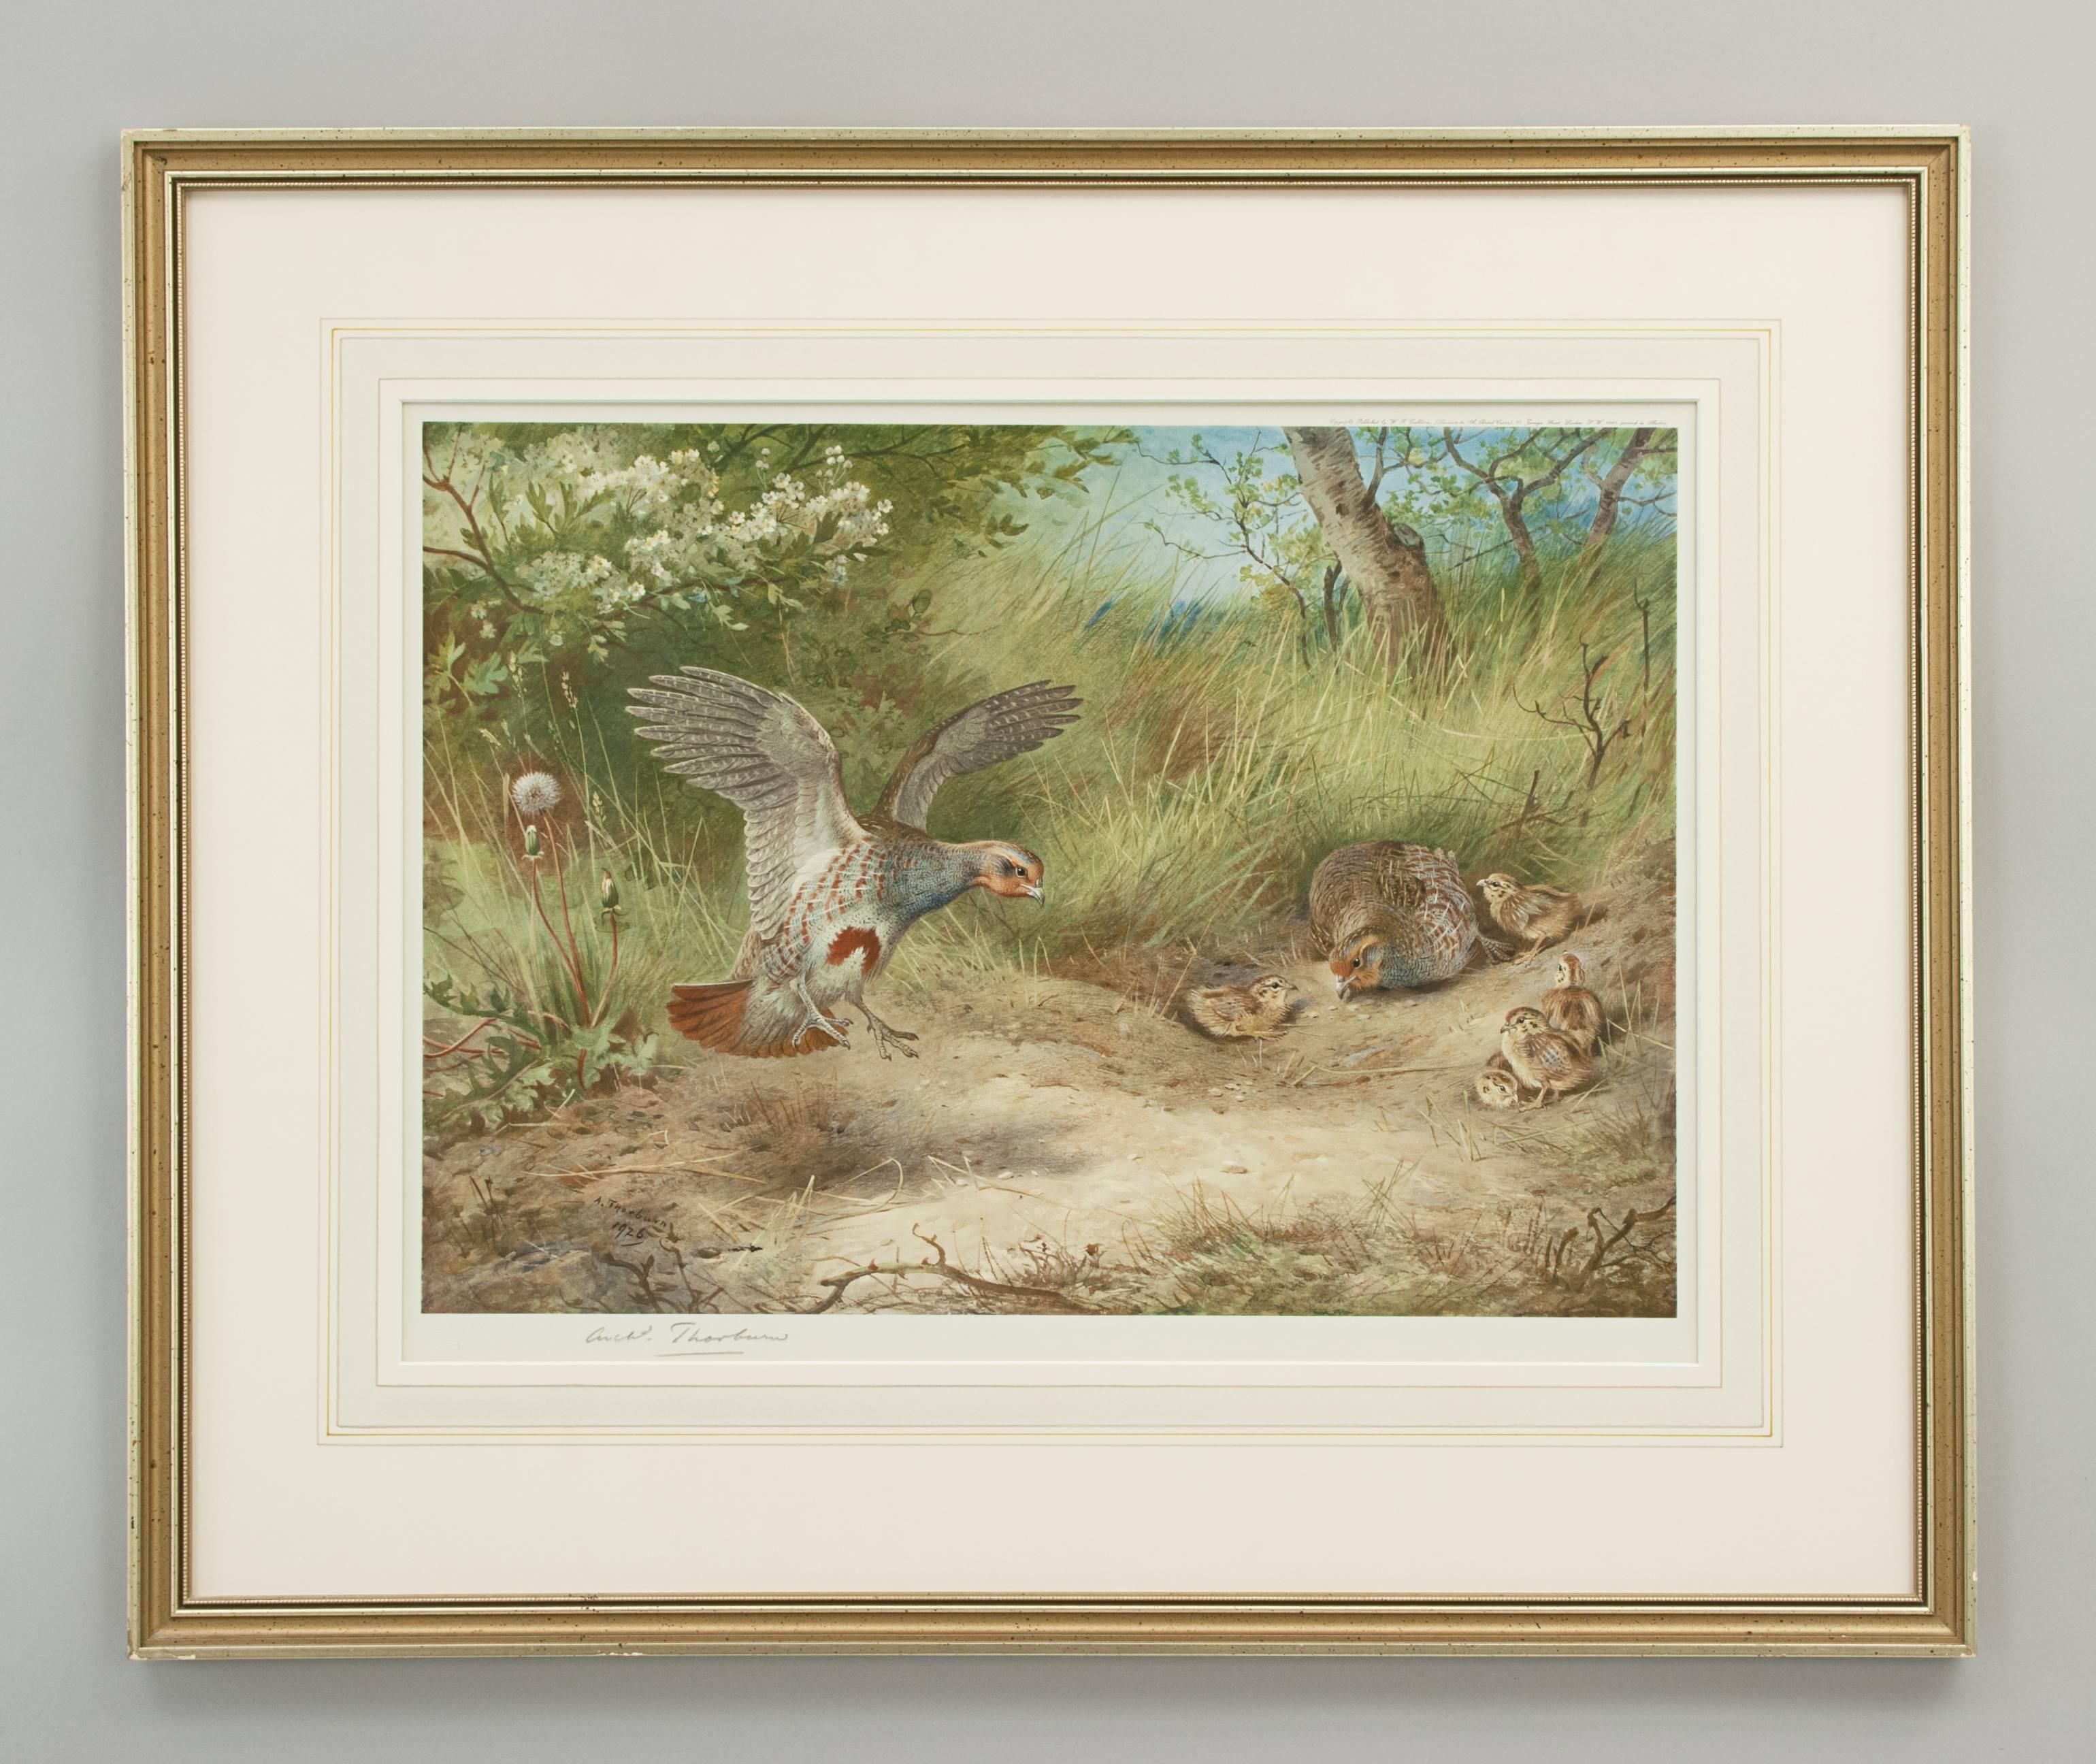 Game bird by Archibald Thorburn.
A game bird colotype print by Archibald Thorburn, titled 'Spring'. This is a single picture from a set of four called 'The Seasons'. Each season is represented by a bird, Partridge - Spring, Pheasant - Autumn,